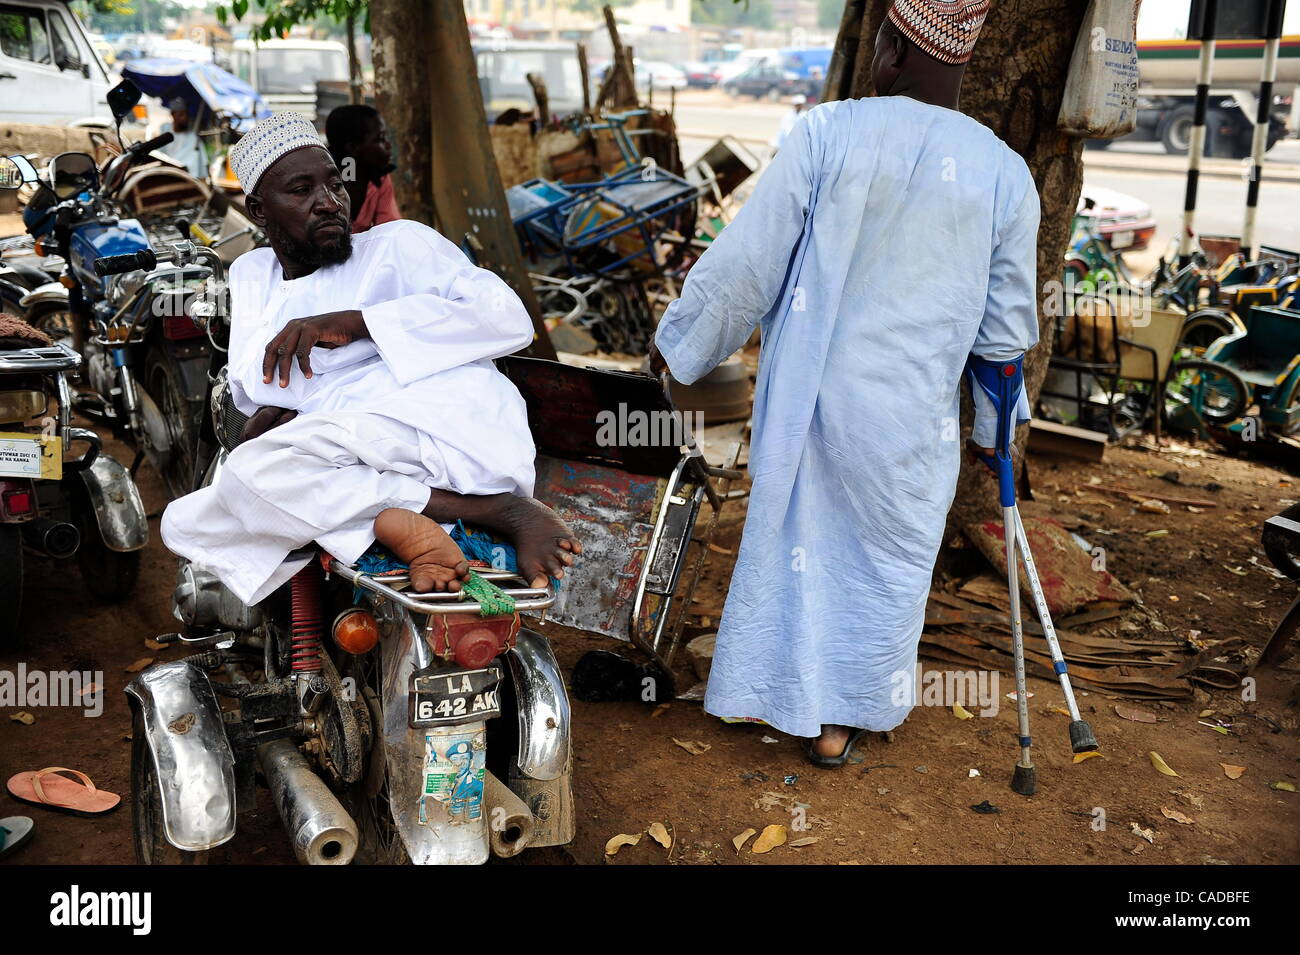 Aug. 5, 2010 - Kano, KANO, NIGERIA - Polio victim Sunusi Mohammad, lays on a custom modified motorcycle at the Kano State Polio Victims Trust Association in Kano, Nigeria. Right is Musa Mohammad, also with polio. Men with polio find community at the association..Religious zealotry and misinformation Stock Photo